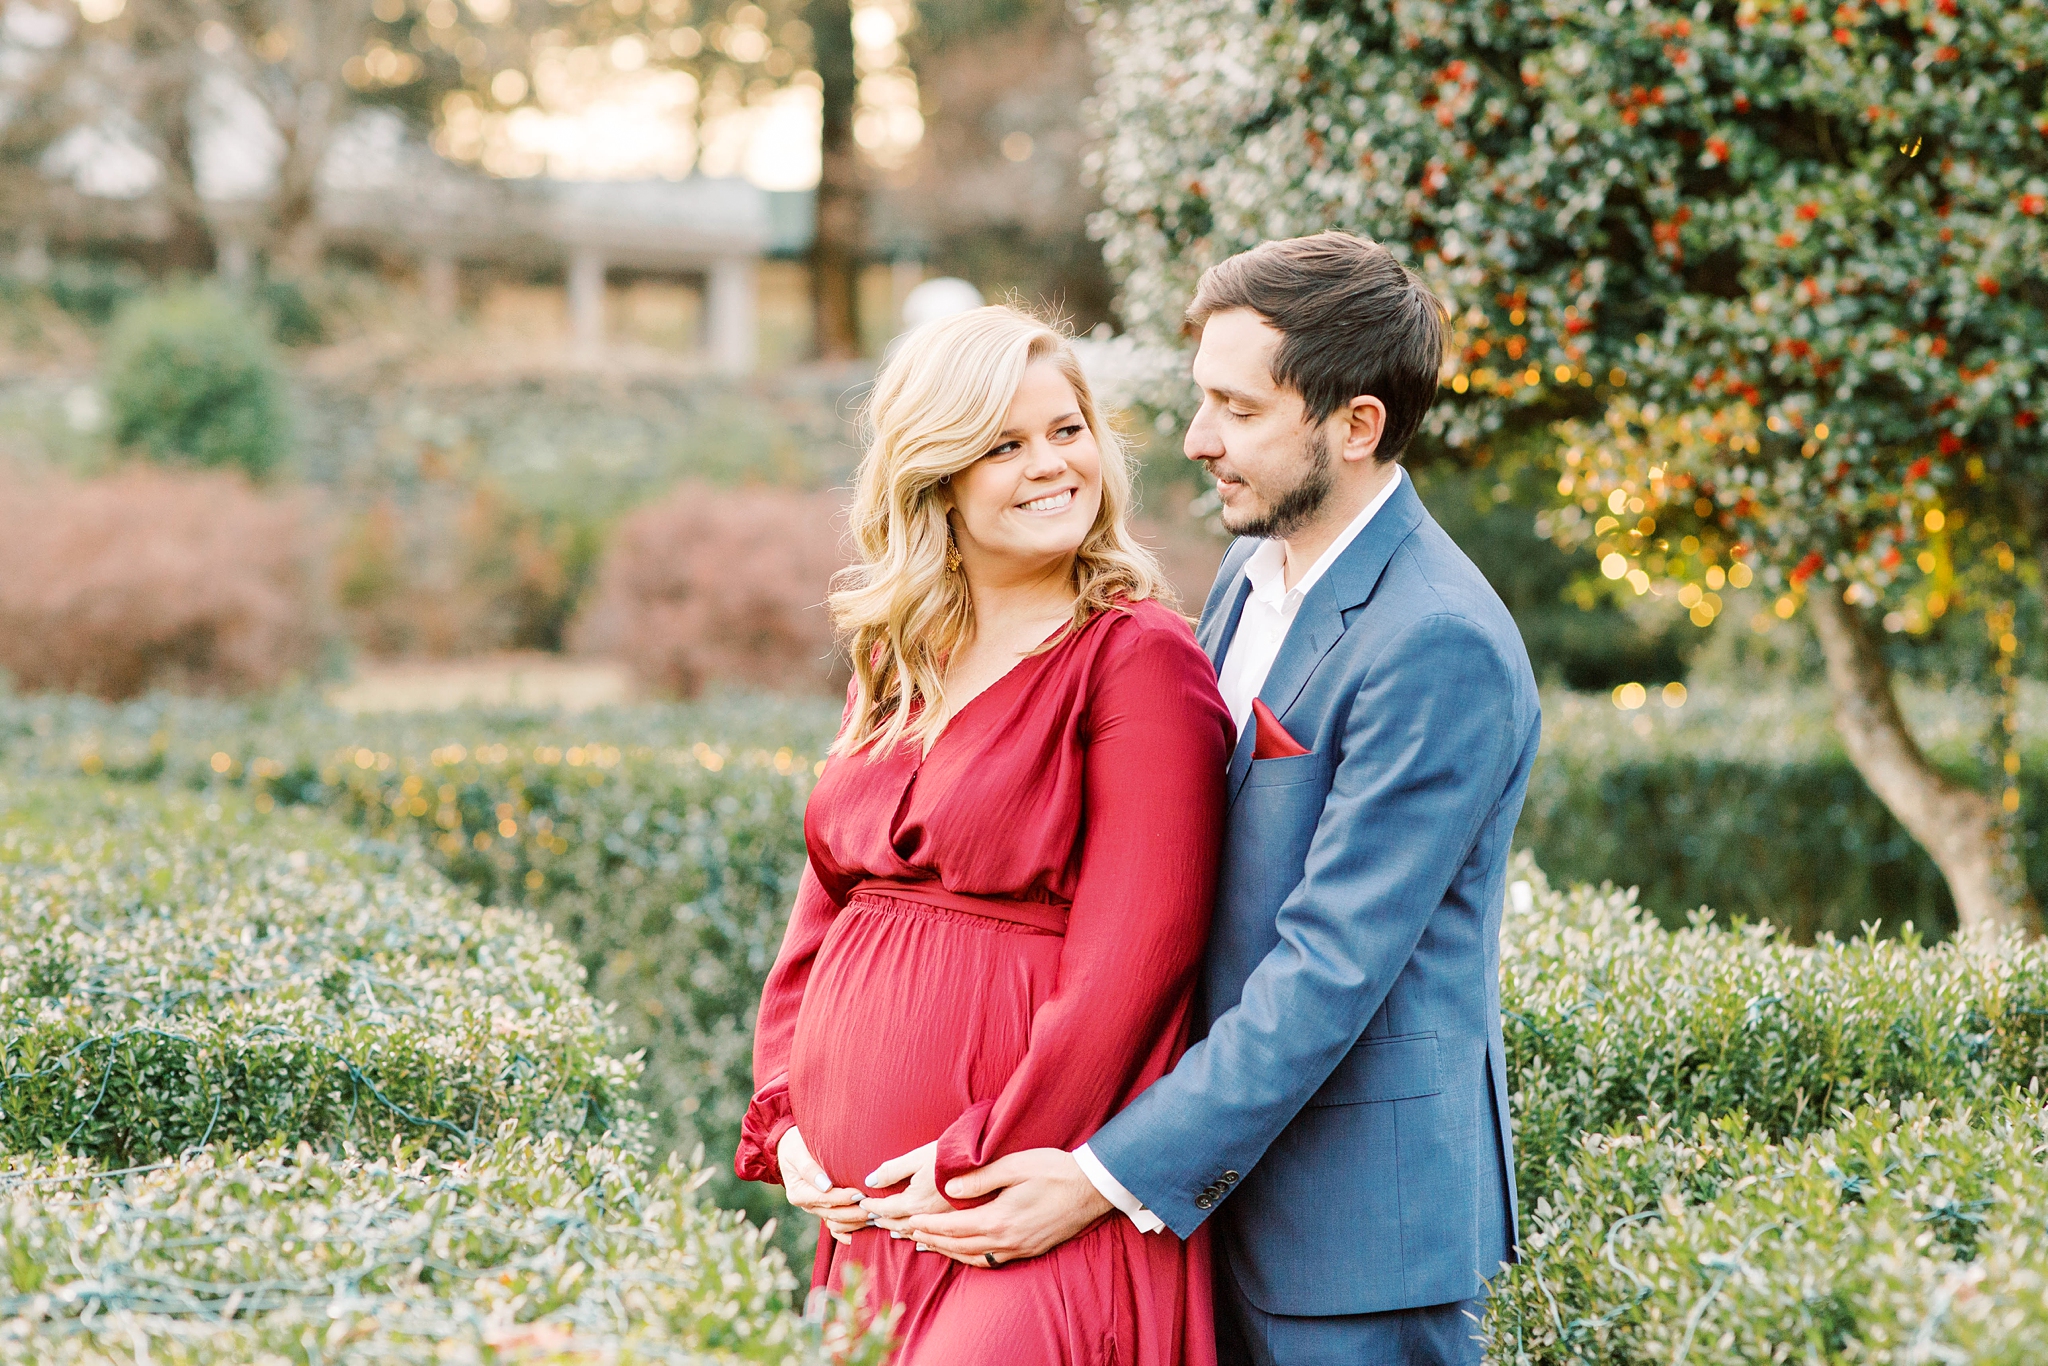 A fine art maternity session in Northern, VA at Airlie Center featuring a stylish couple and their adorable yellow lab.